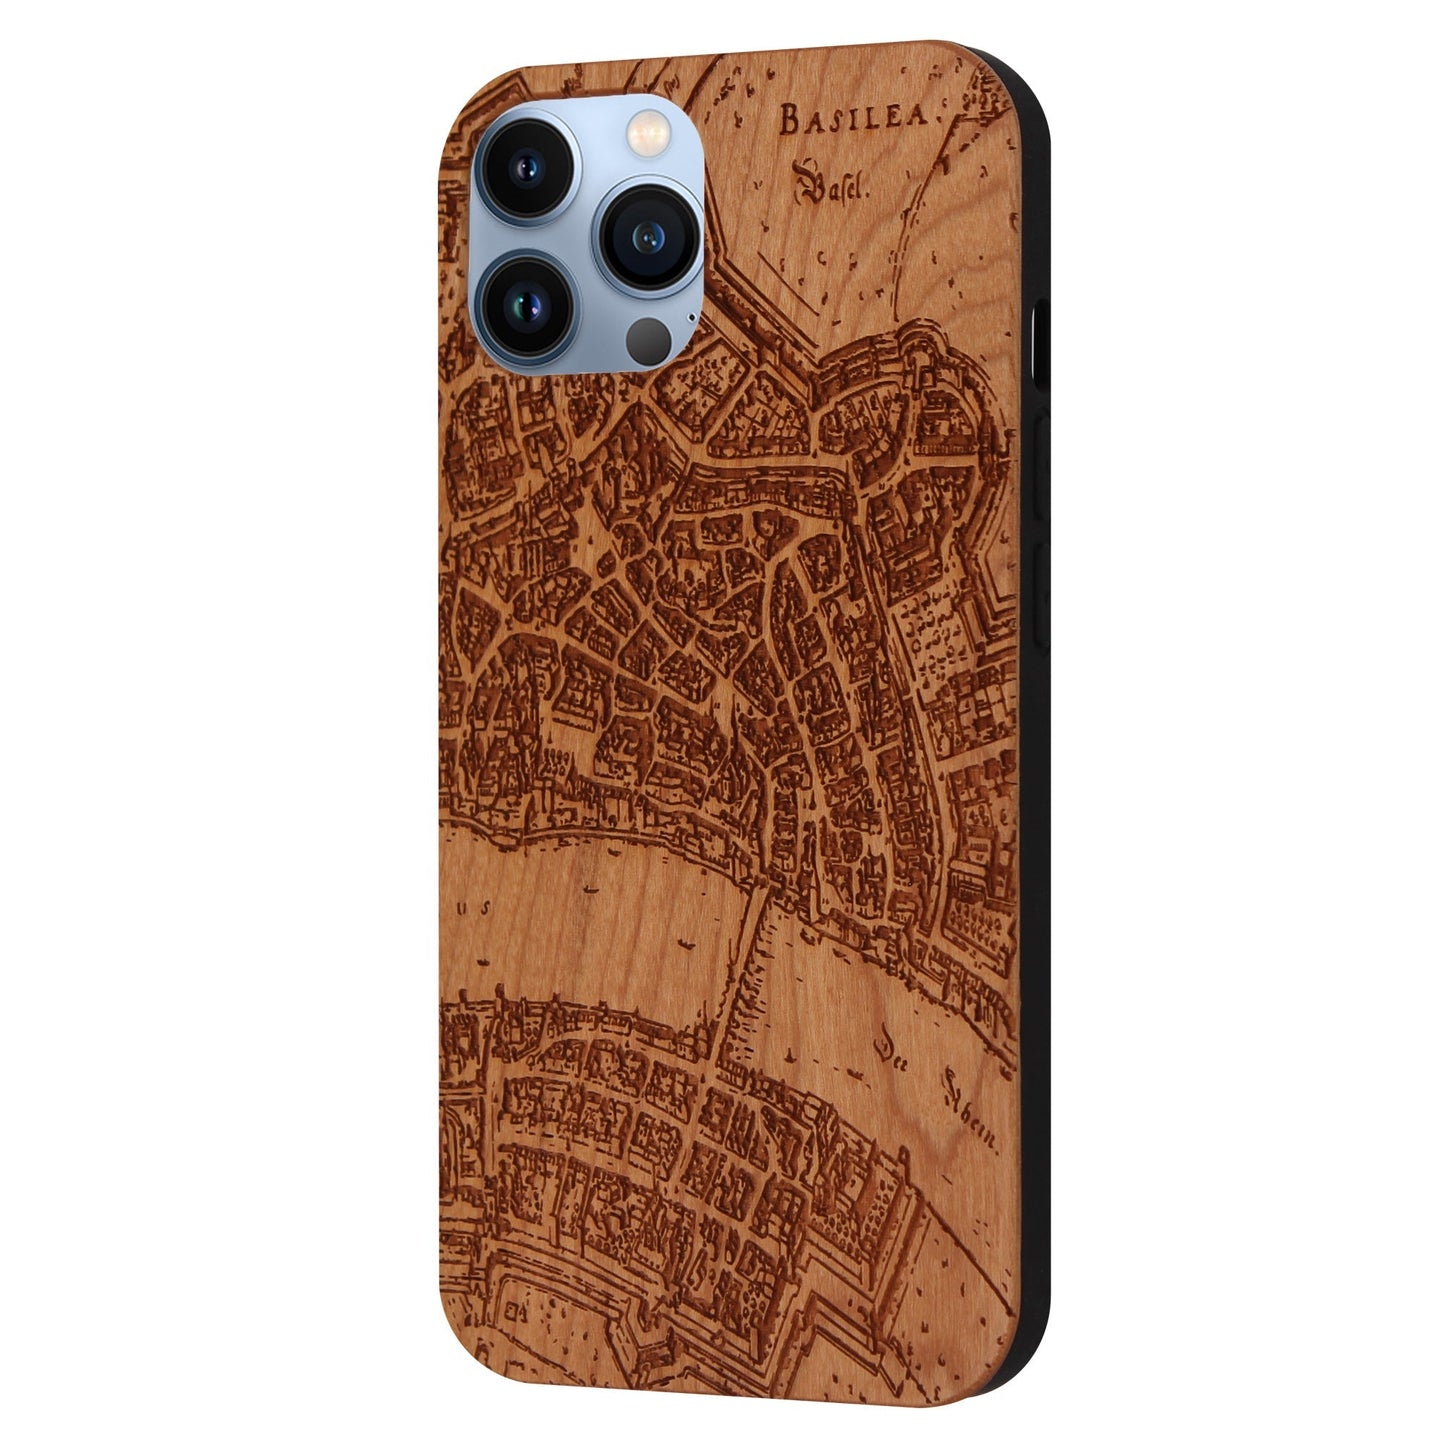 Basel Merian Eden case made of cherry wood for iPhone 14 Pro Max